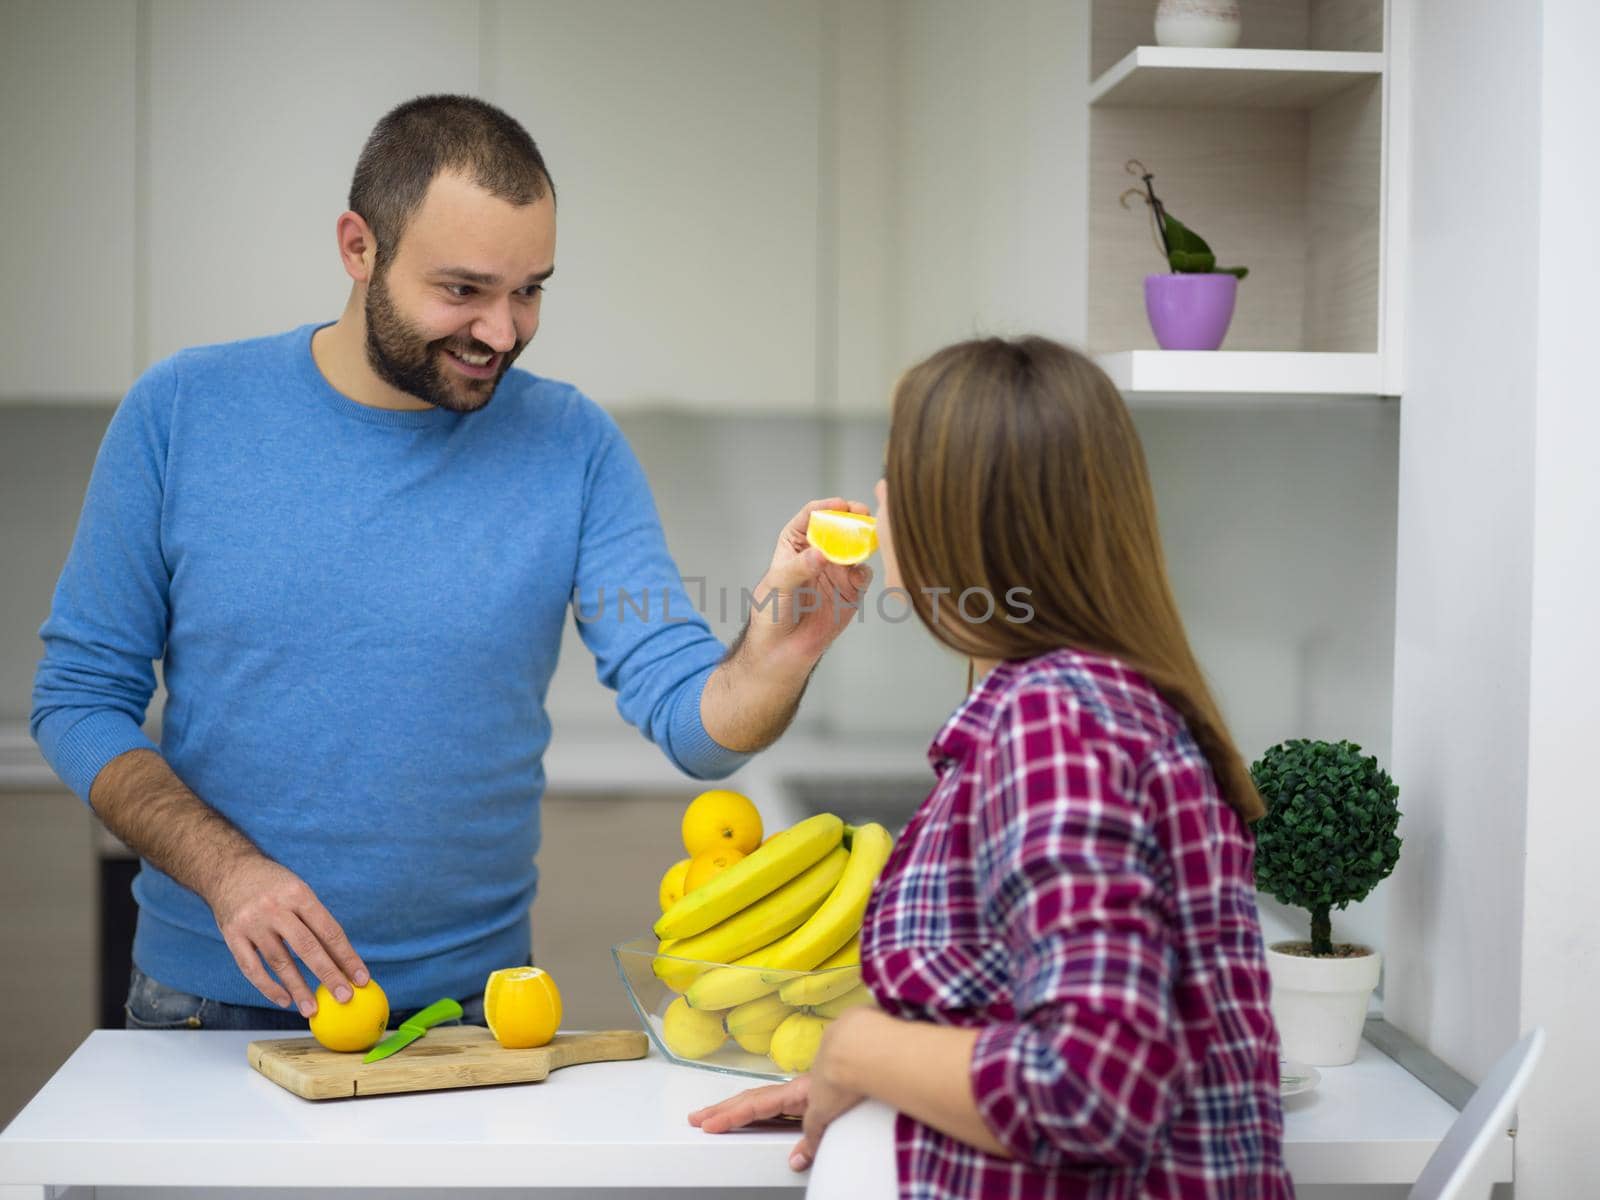 young pregnant couple cooking food fruit lemon juice at kitchen, lifestyle healthy pregnancy happy life concept